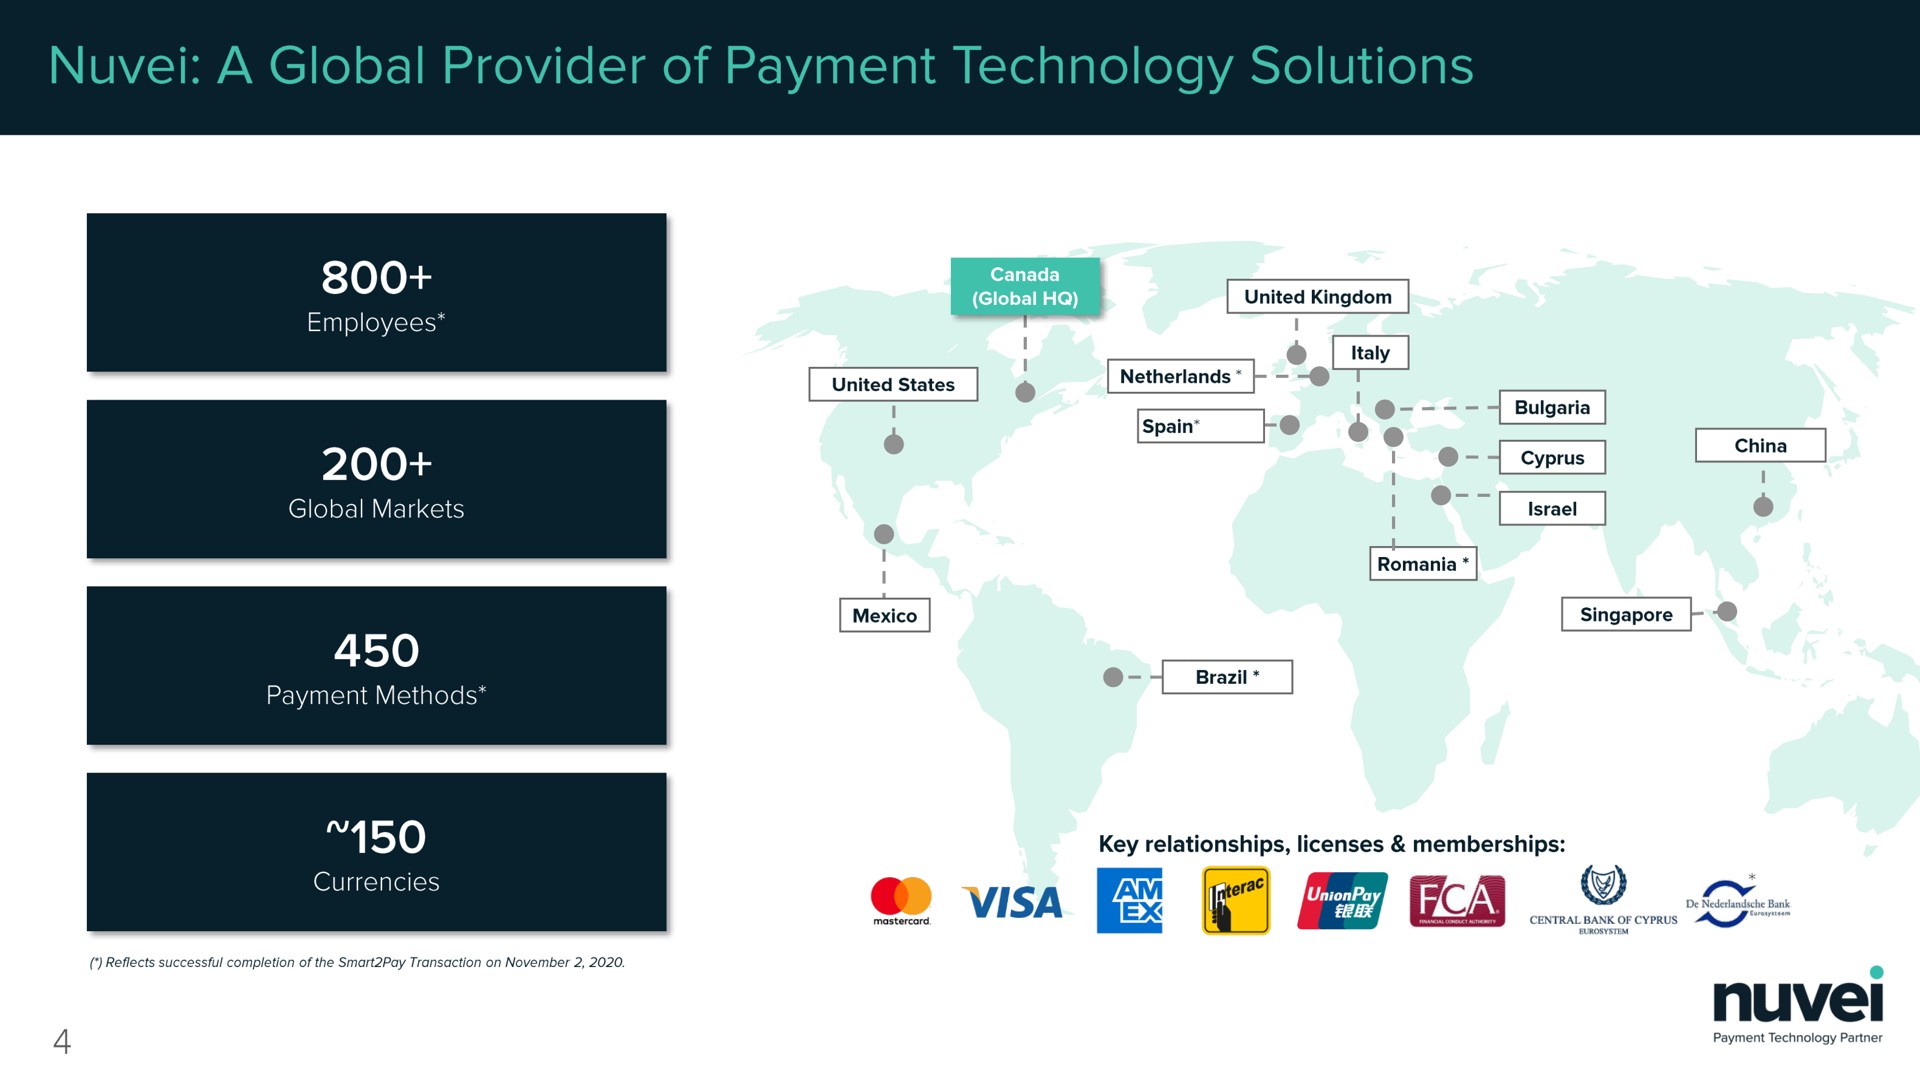 a global provider of payment technology solutions | Nuvei